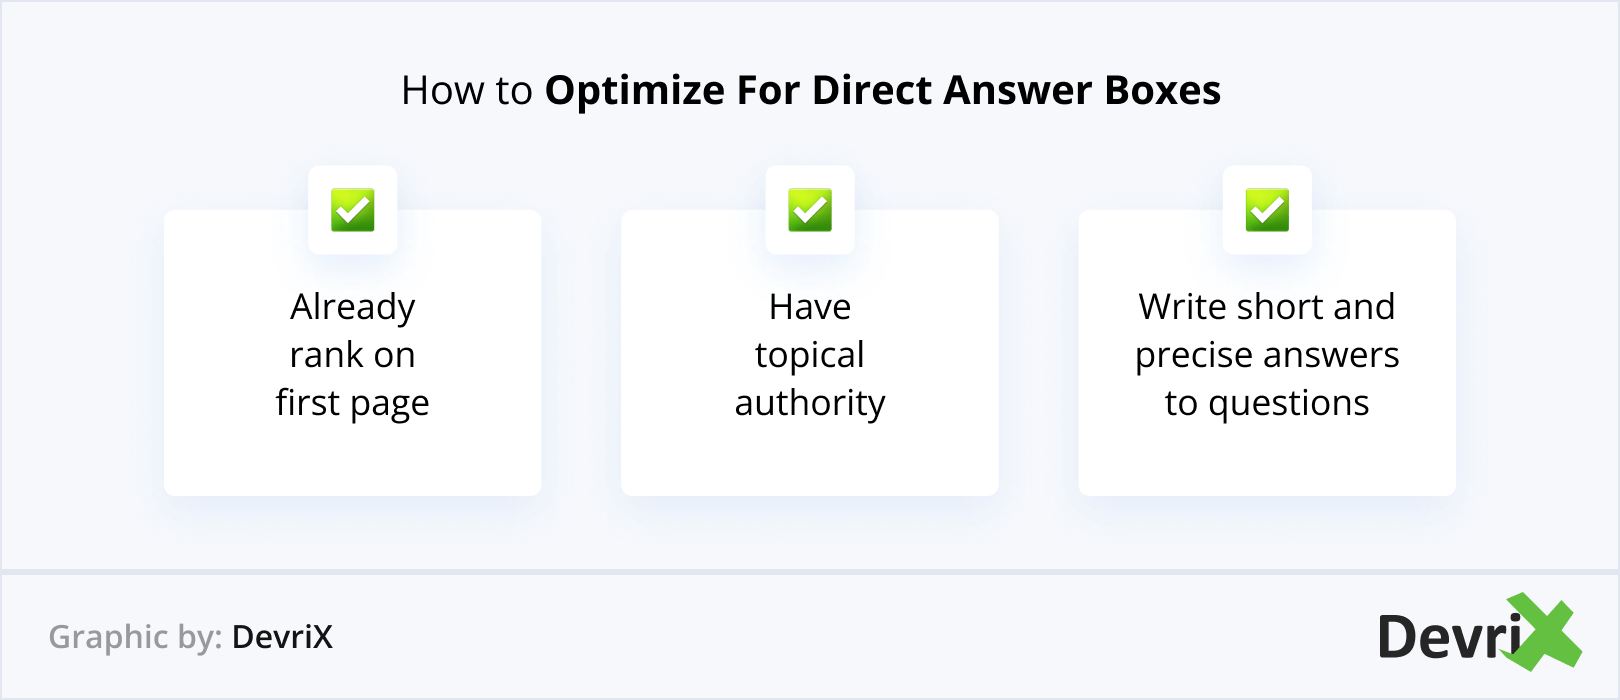 2. How to Optimize For Direct Answer Boxes